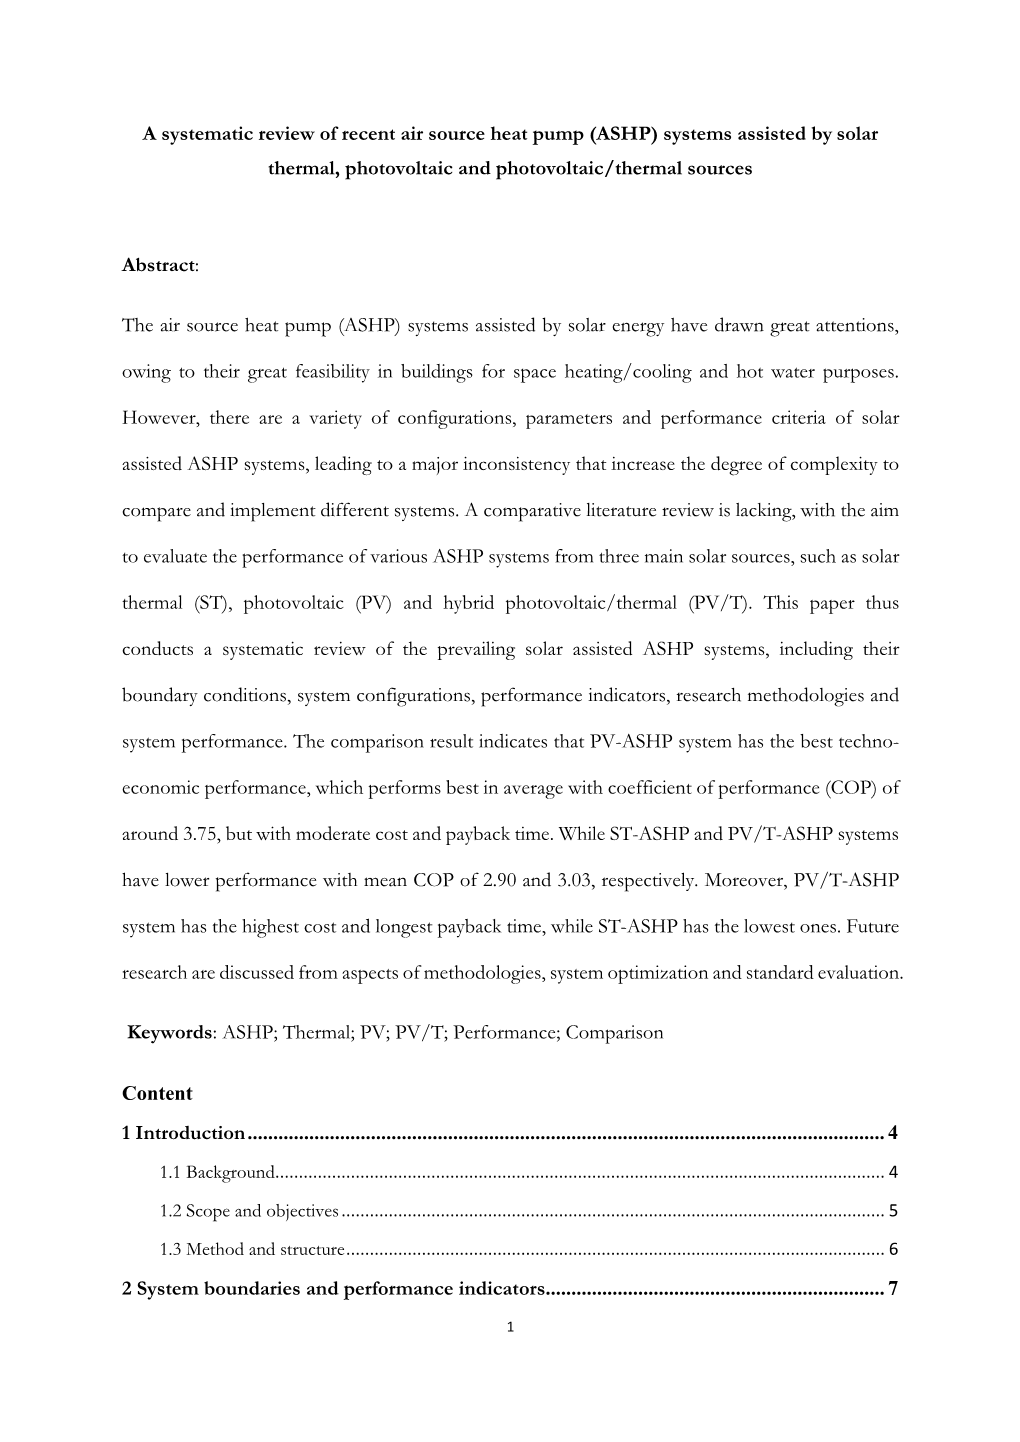 A Systematic Review of Recent Air Source Heat Pump (ASHP) Systems Assisted by Solar Thermal, Photovoltaic and Photovoltaic/Thermal Sources